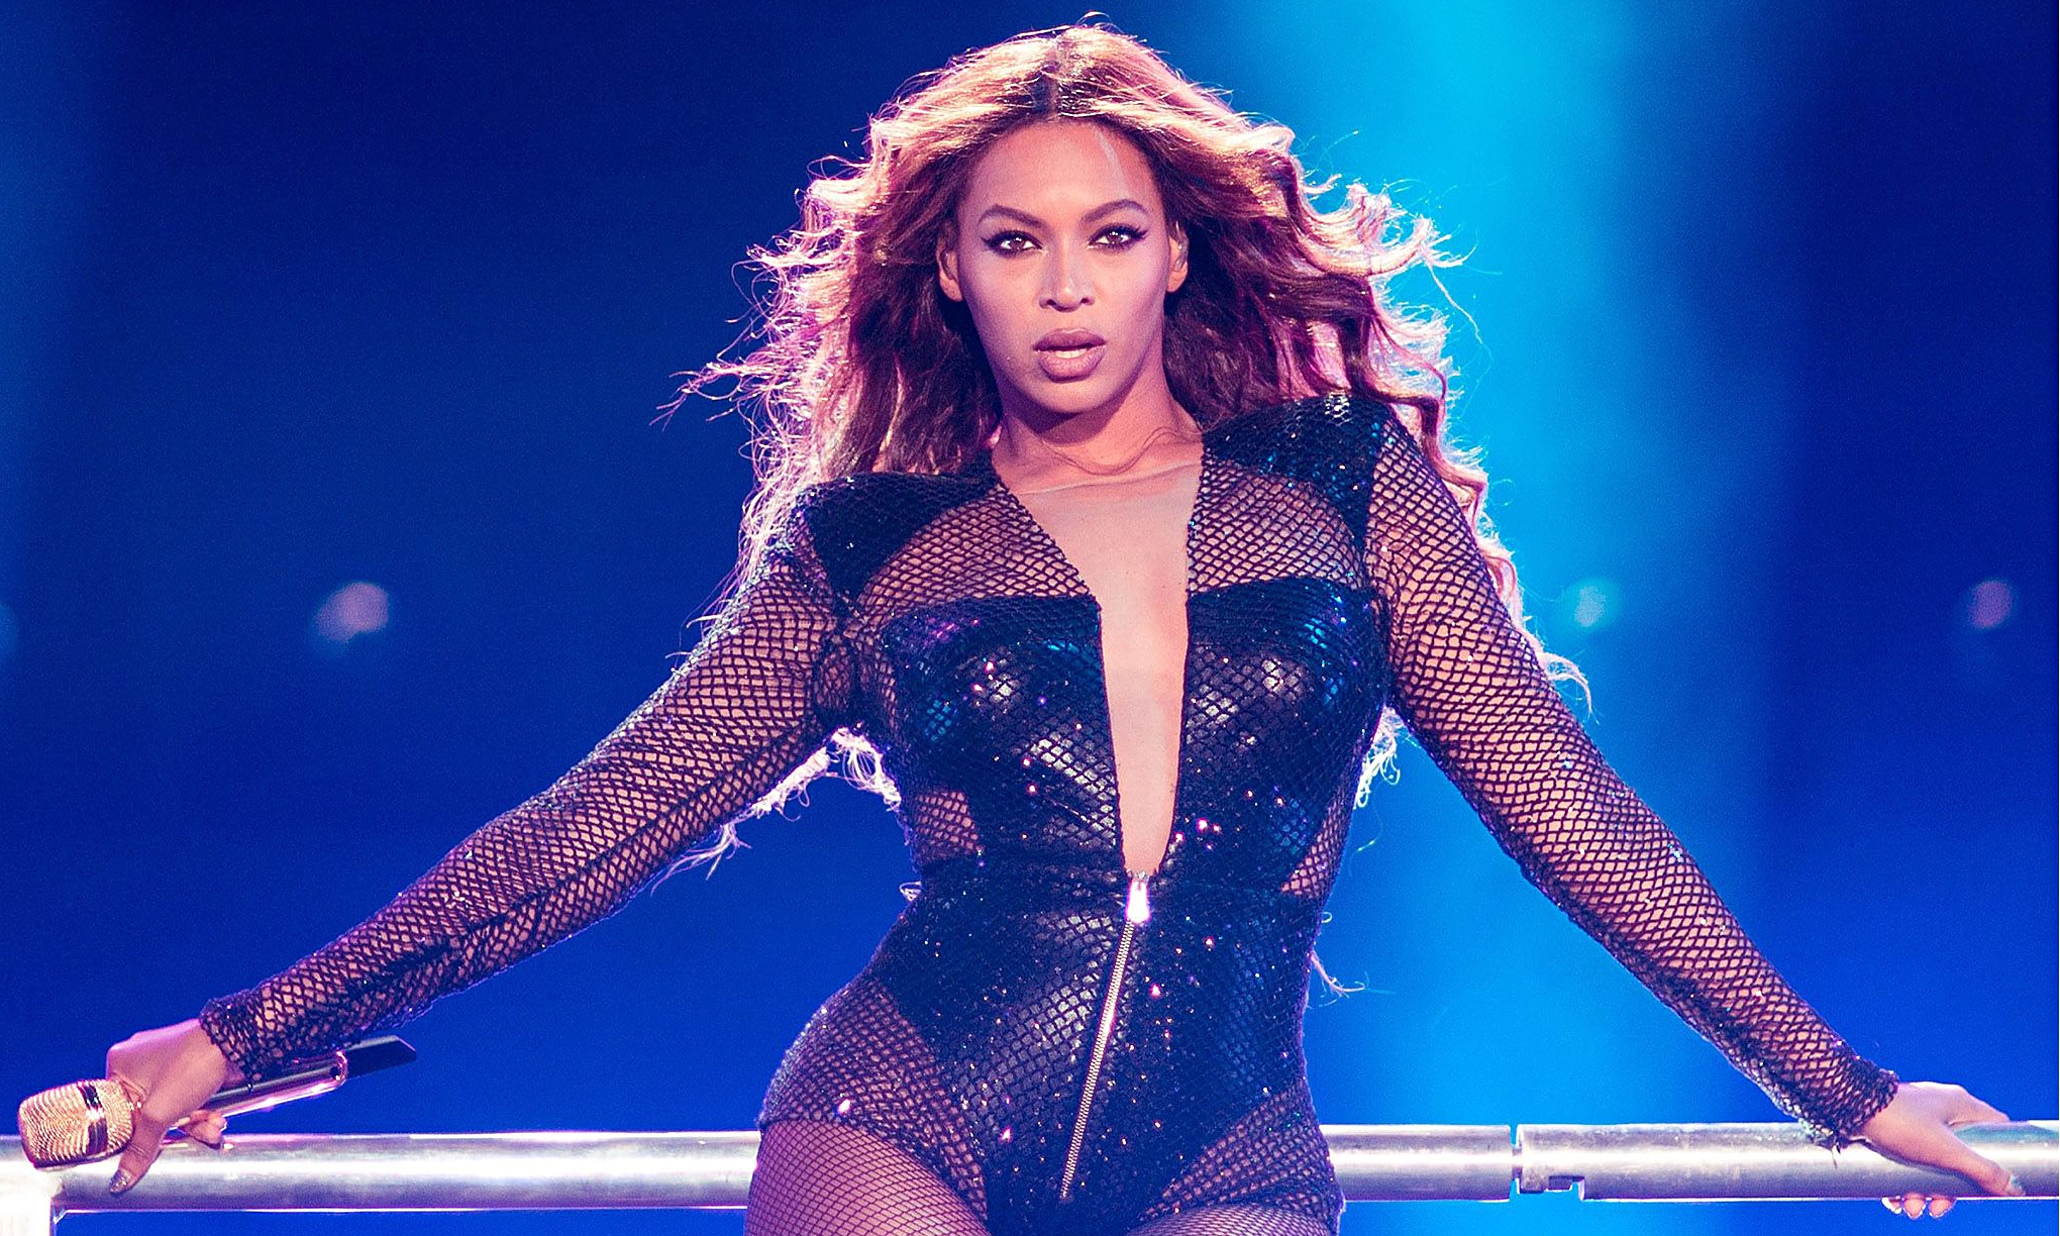 Beyonce has launched a vegan meal delivery service.